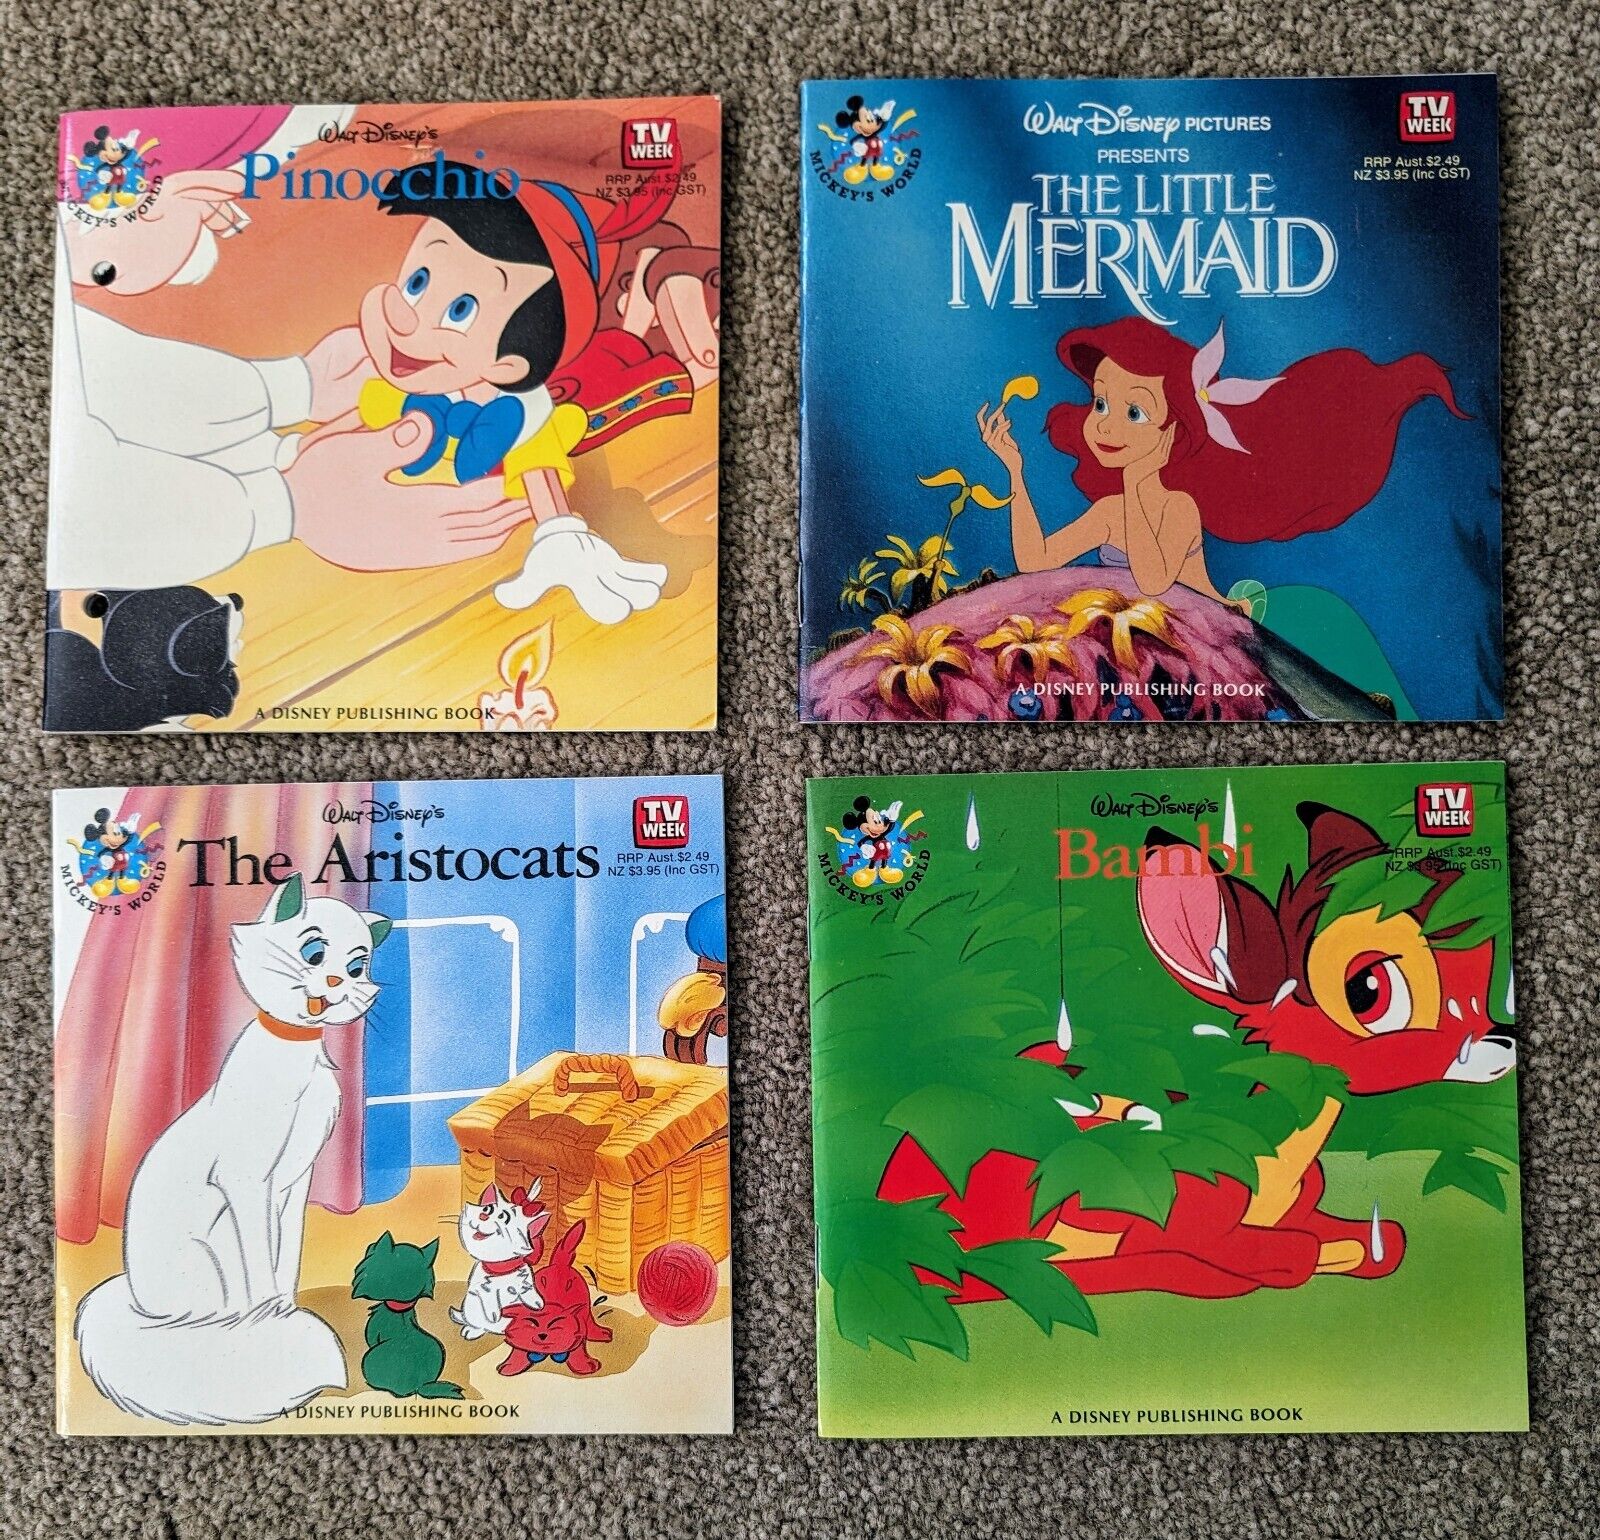 Brand new vintage childrens books, published/printed in the 80s